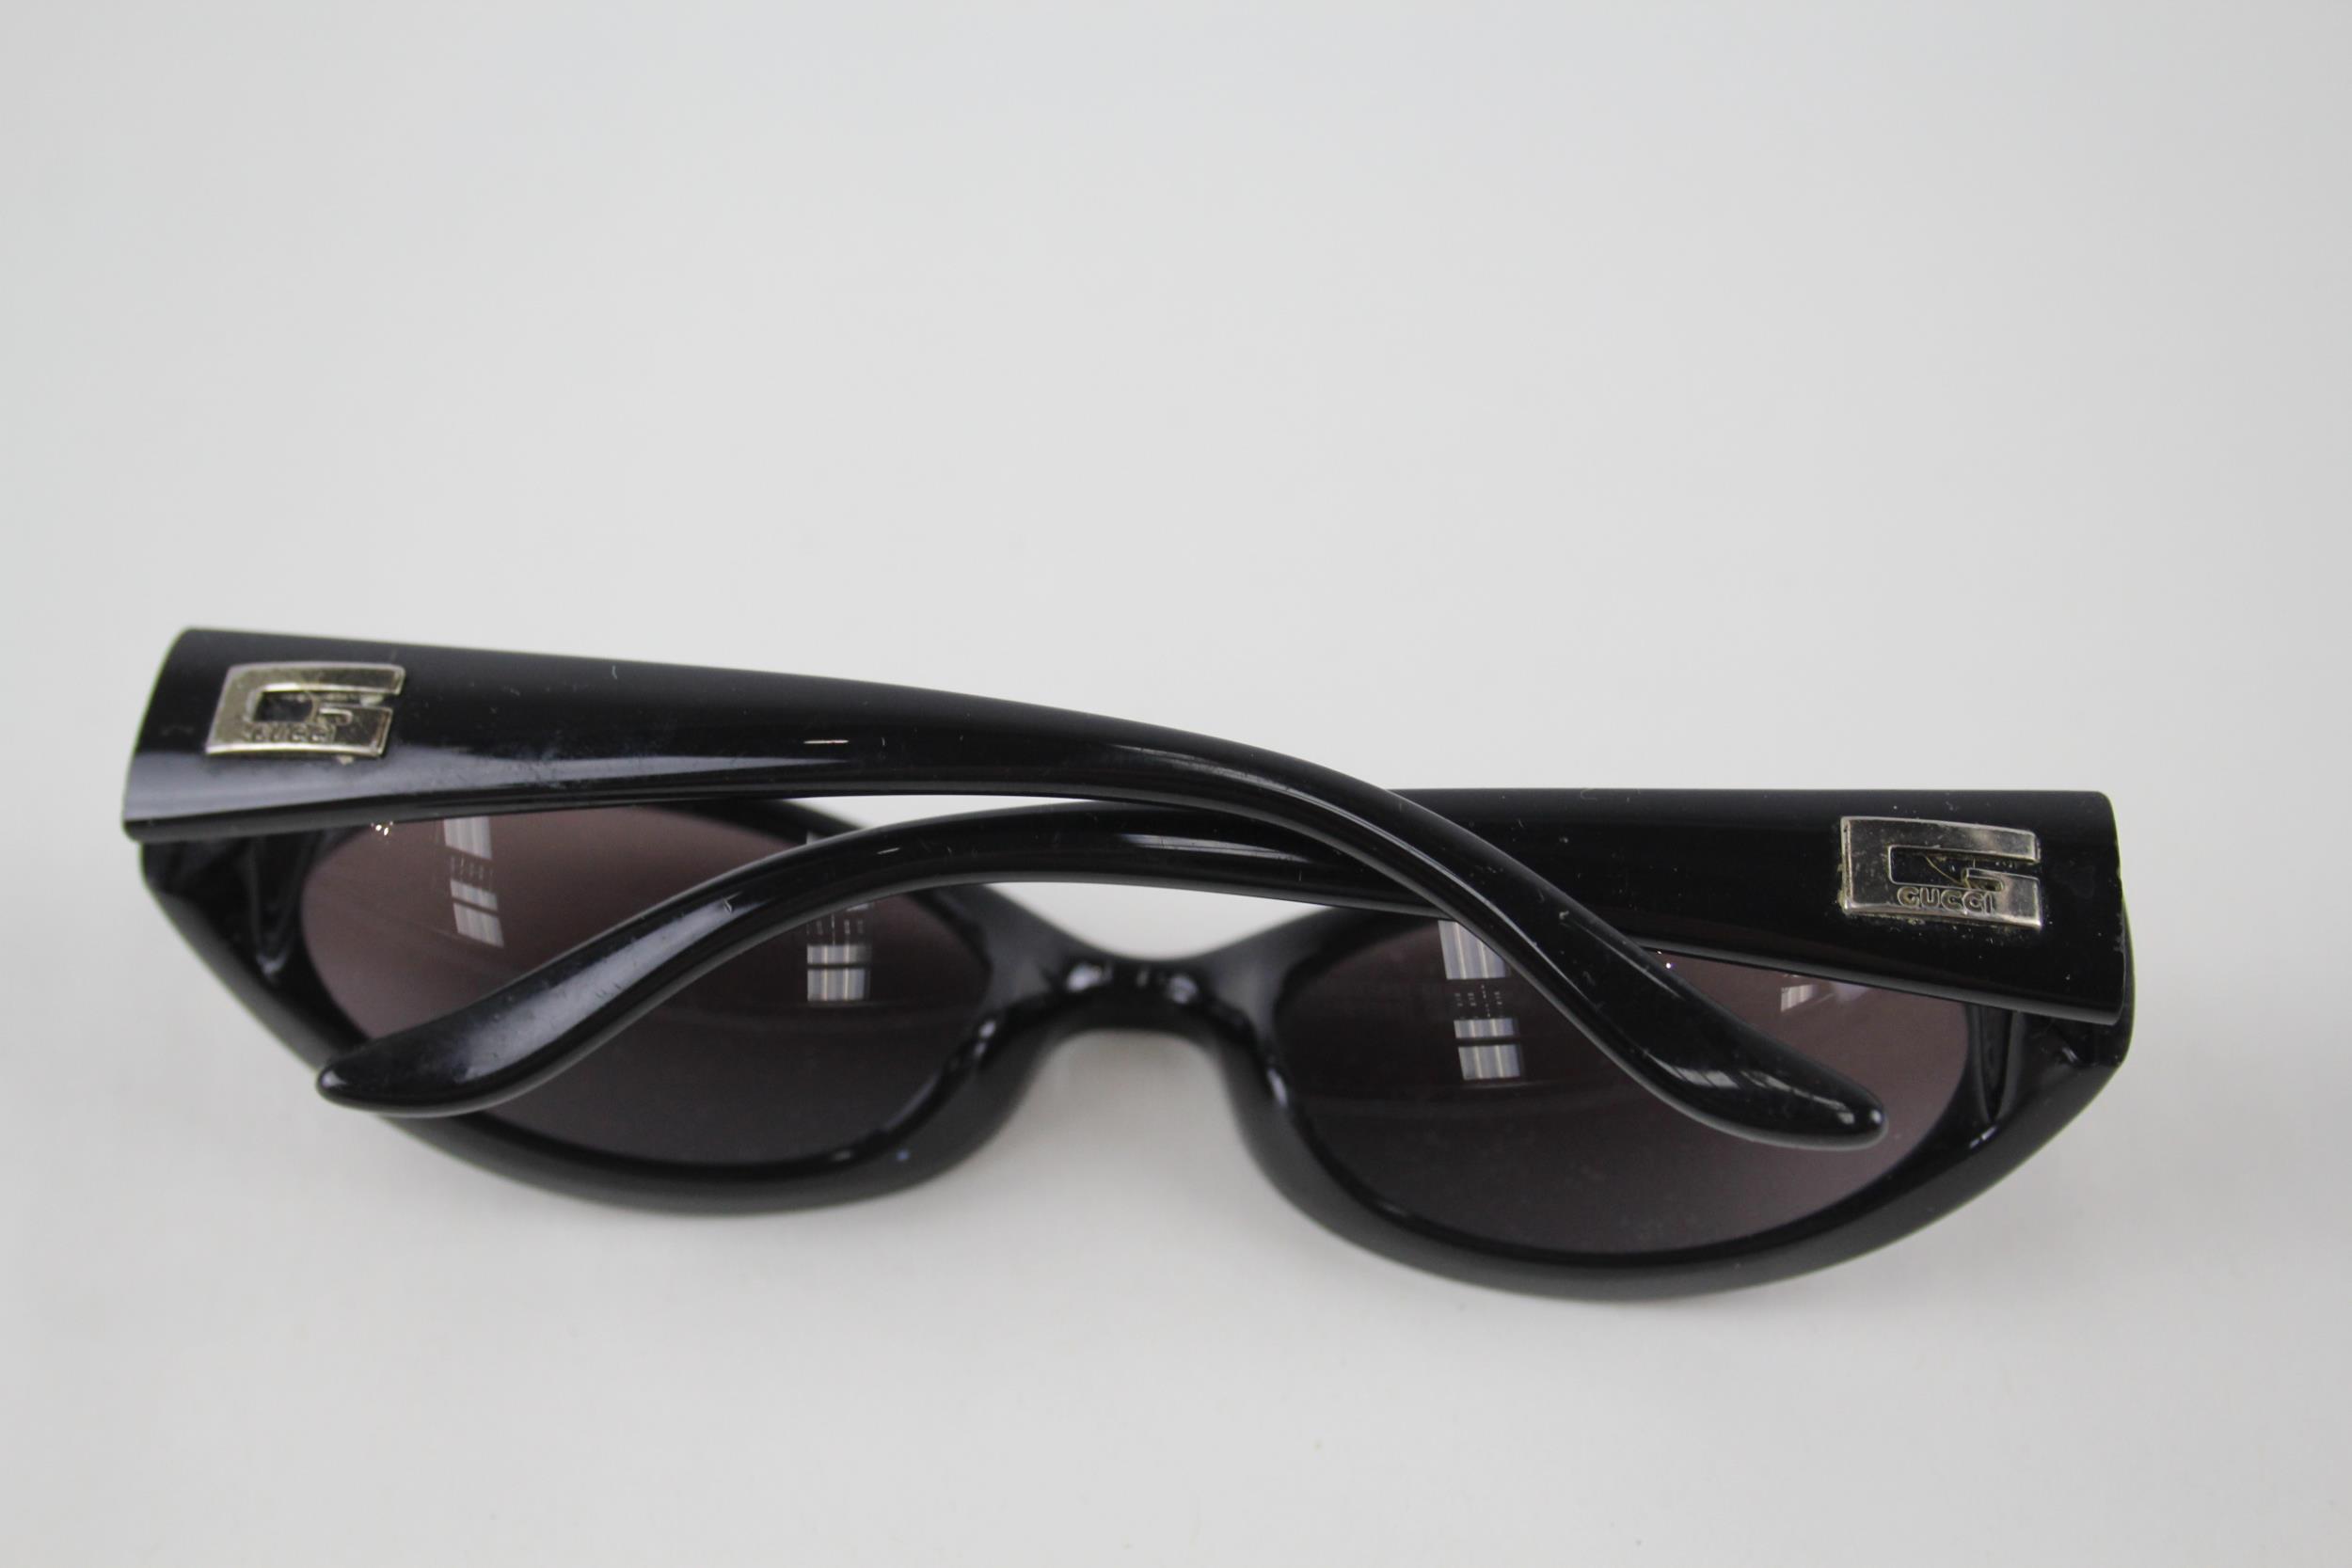 Designer Gucci Sunglasses In Case - Items are in previously owned condition Signs of age & wear - Image 4 of 7